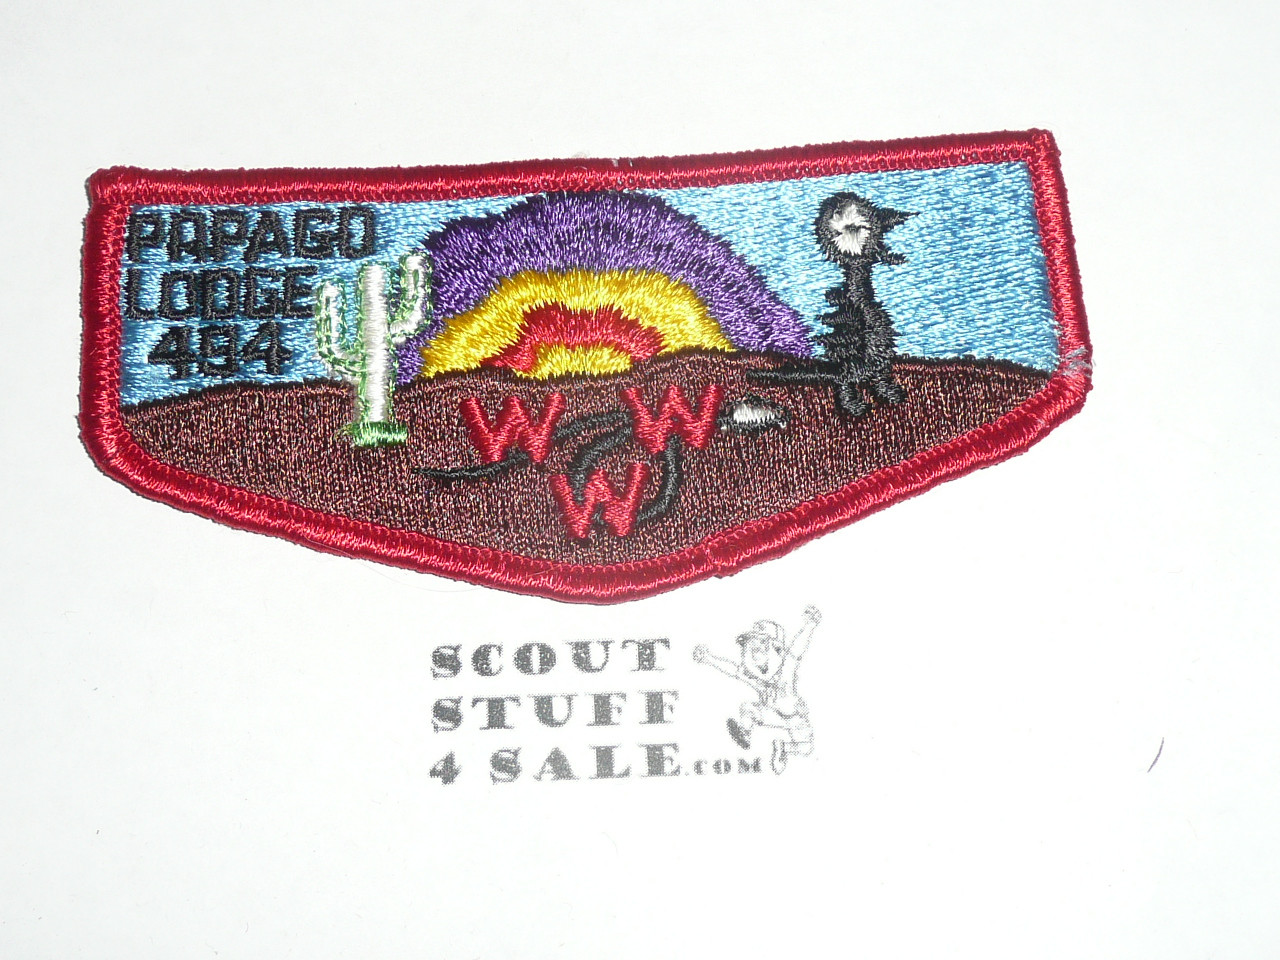 Order of the Arrow Lodge #494 Papago s4 Flap Patch - Boy Scout